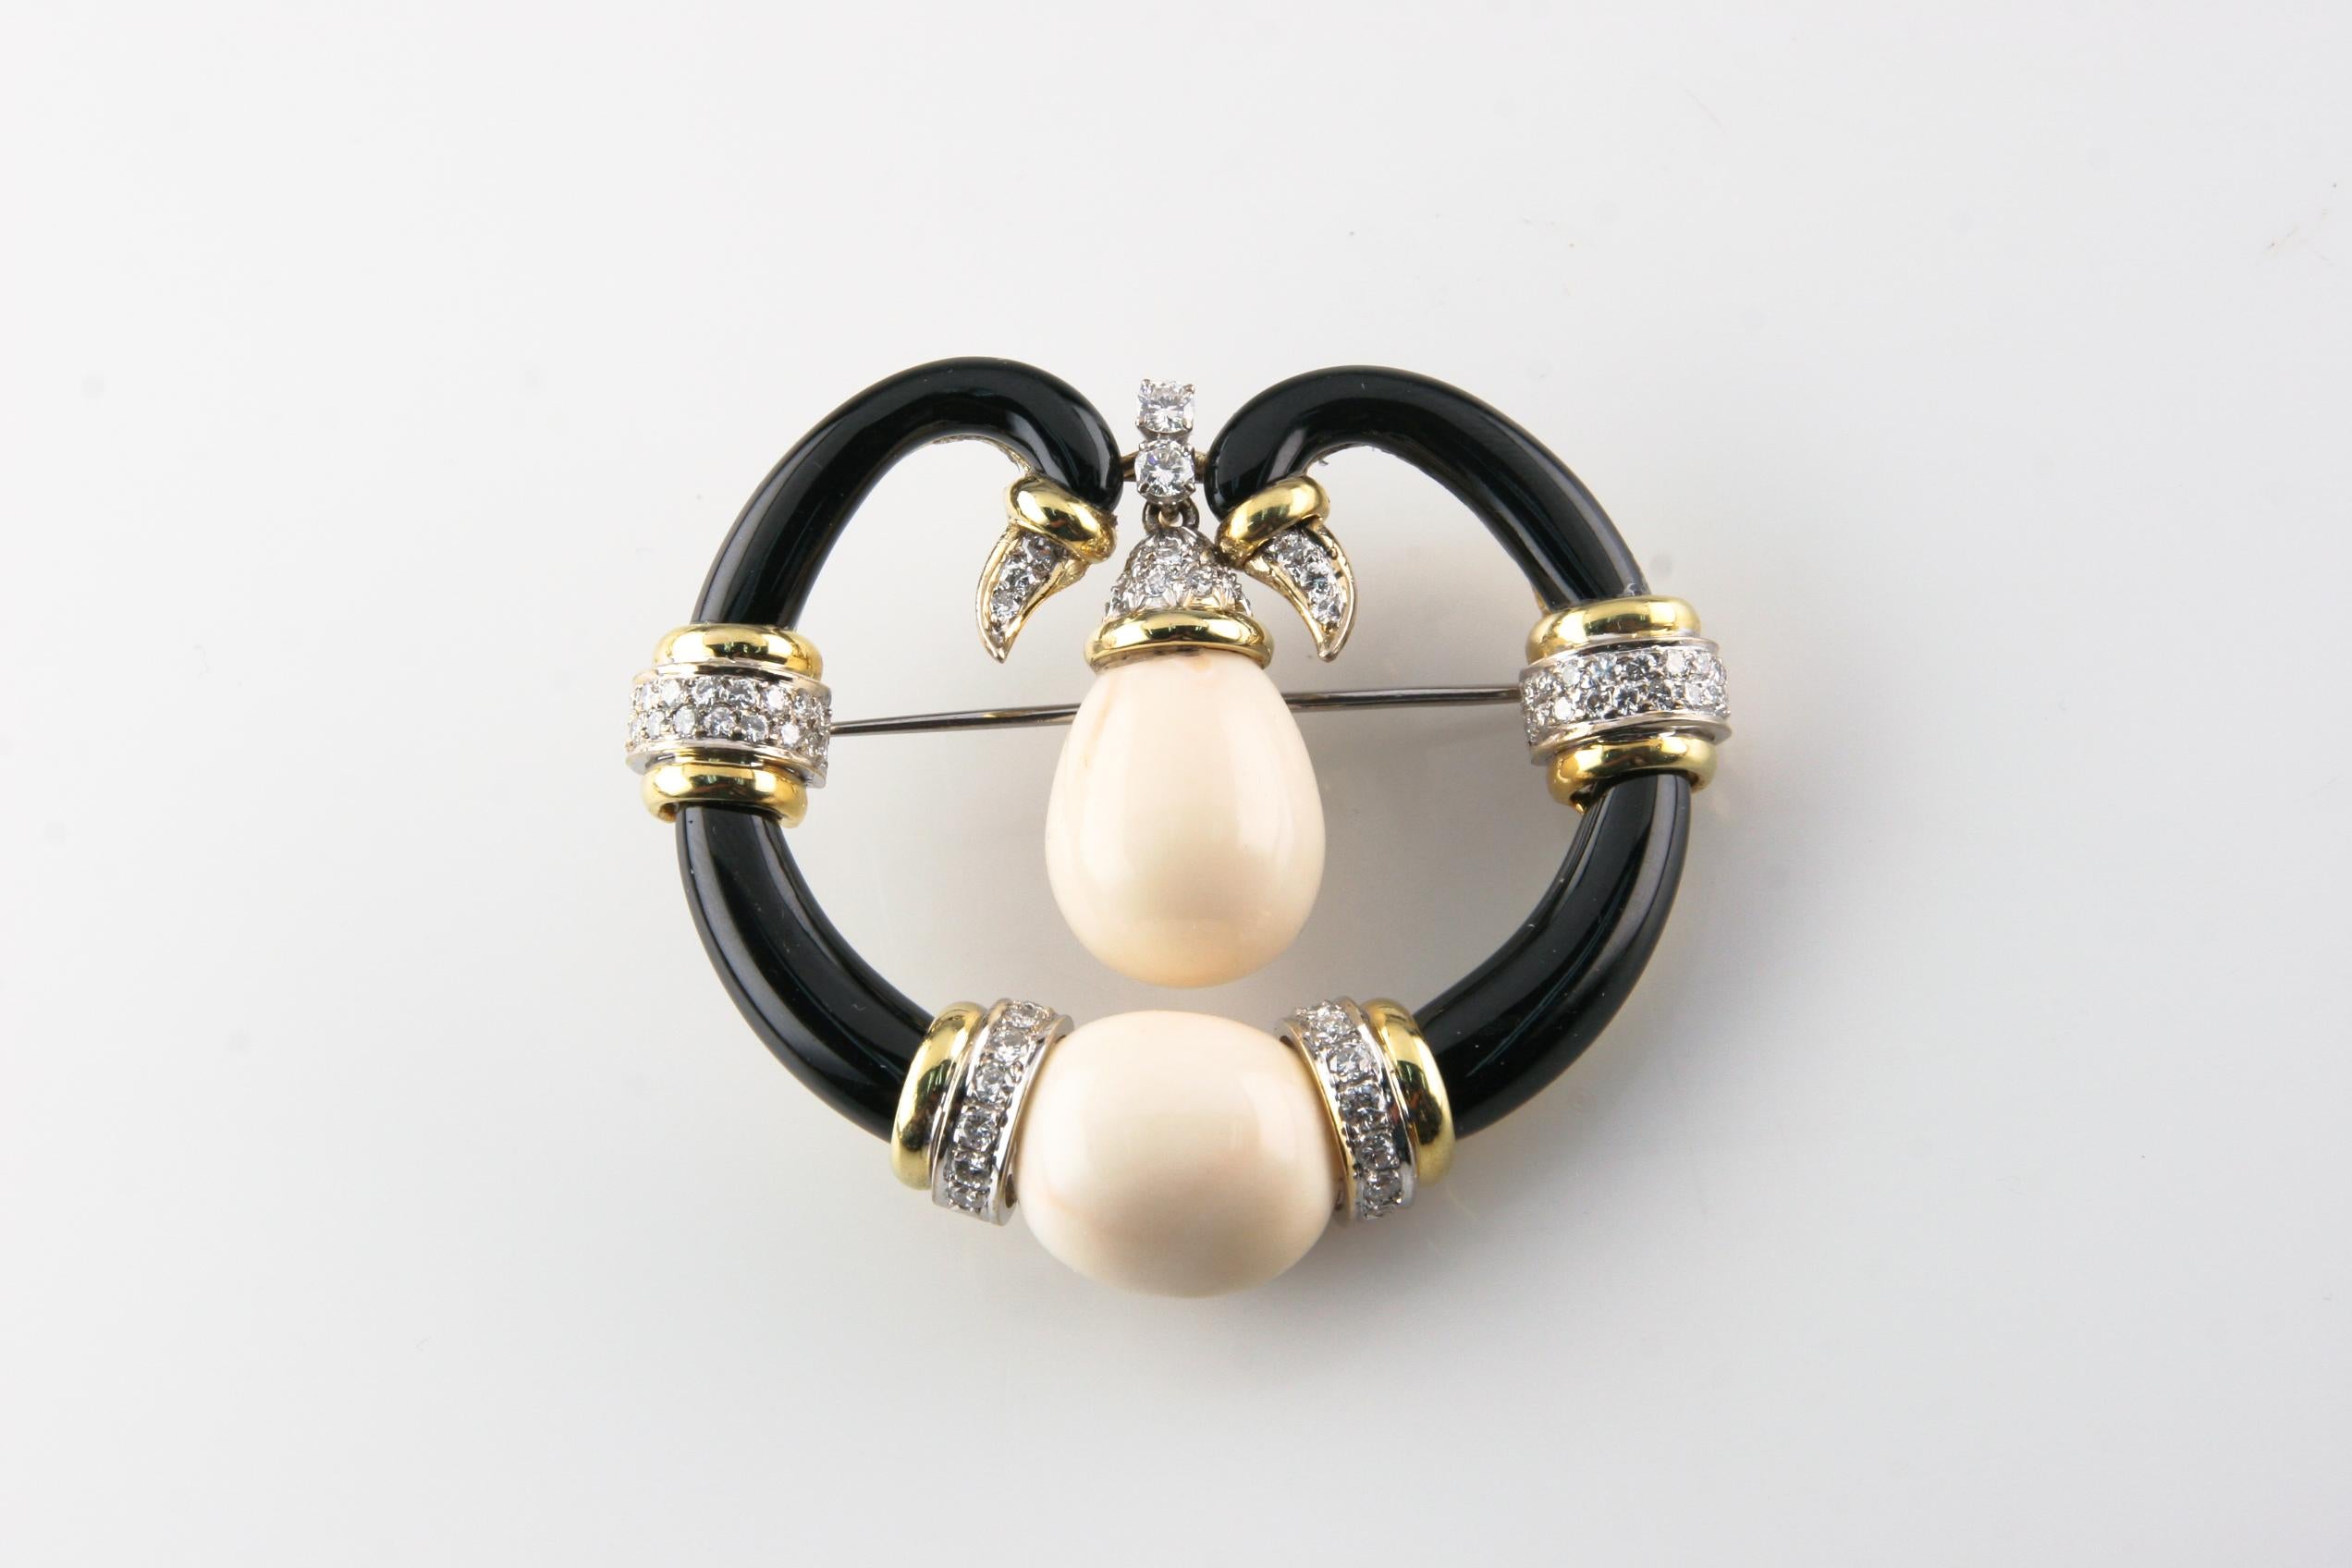 One electronically tested ladies cast & assembled chalcedony & diamond brooch

Bright Finish
Good Condition
Ladies Black Plastique & 18k Yellow Gold Chalcedony and Diamond Brooch
The black plastique brooch features two chalcedony spheres set above